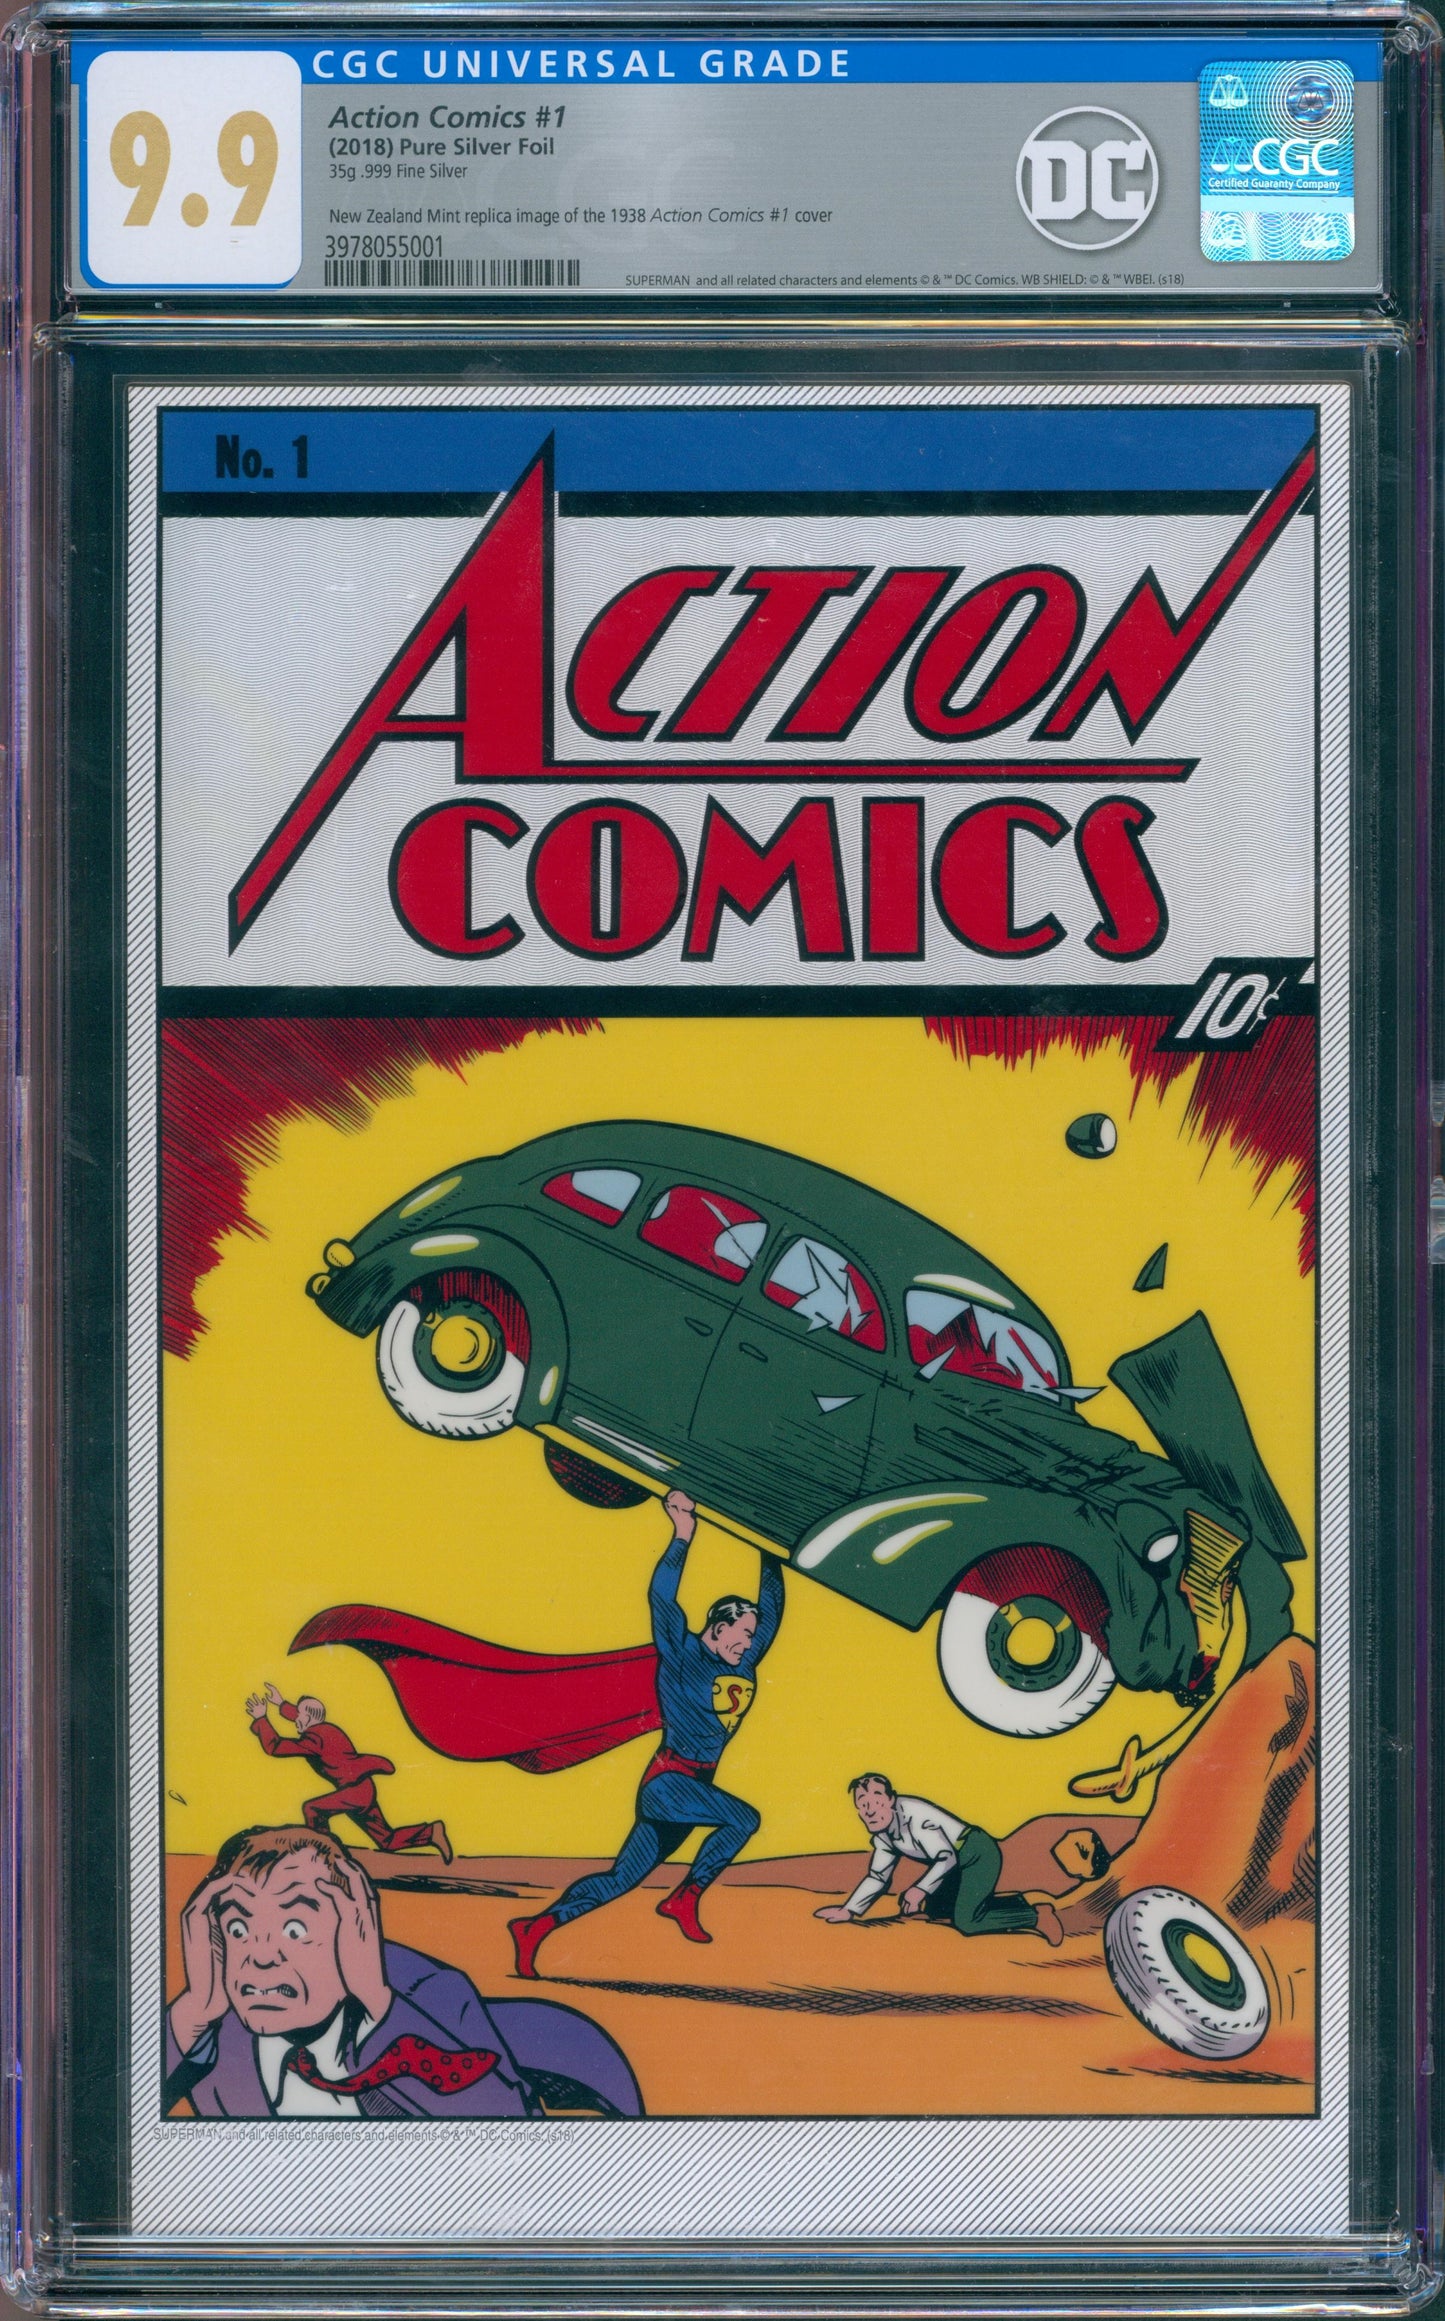 Action Comics #1 Pure Silver Foil.  35g .999 Fine Silver  New Zealand Mint Replica Image of the 1938 Action Comics #1 Cover